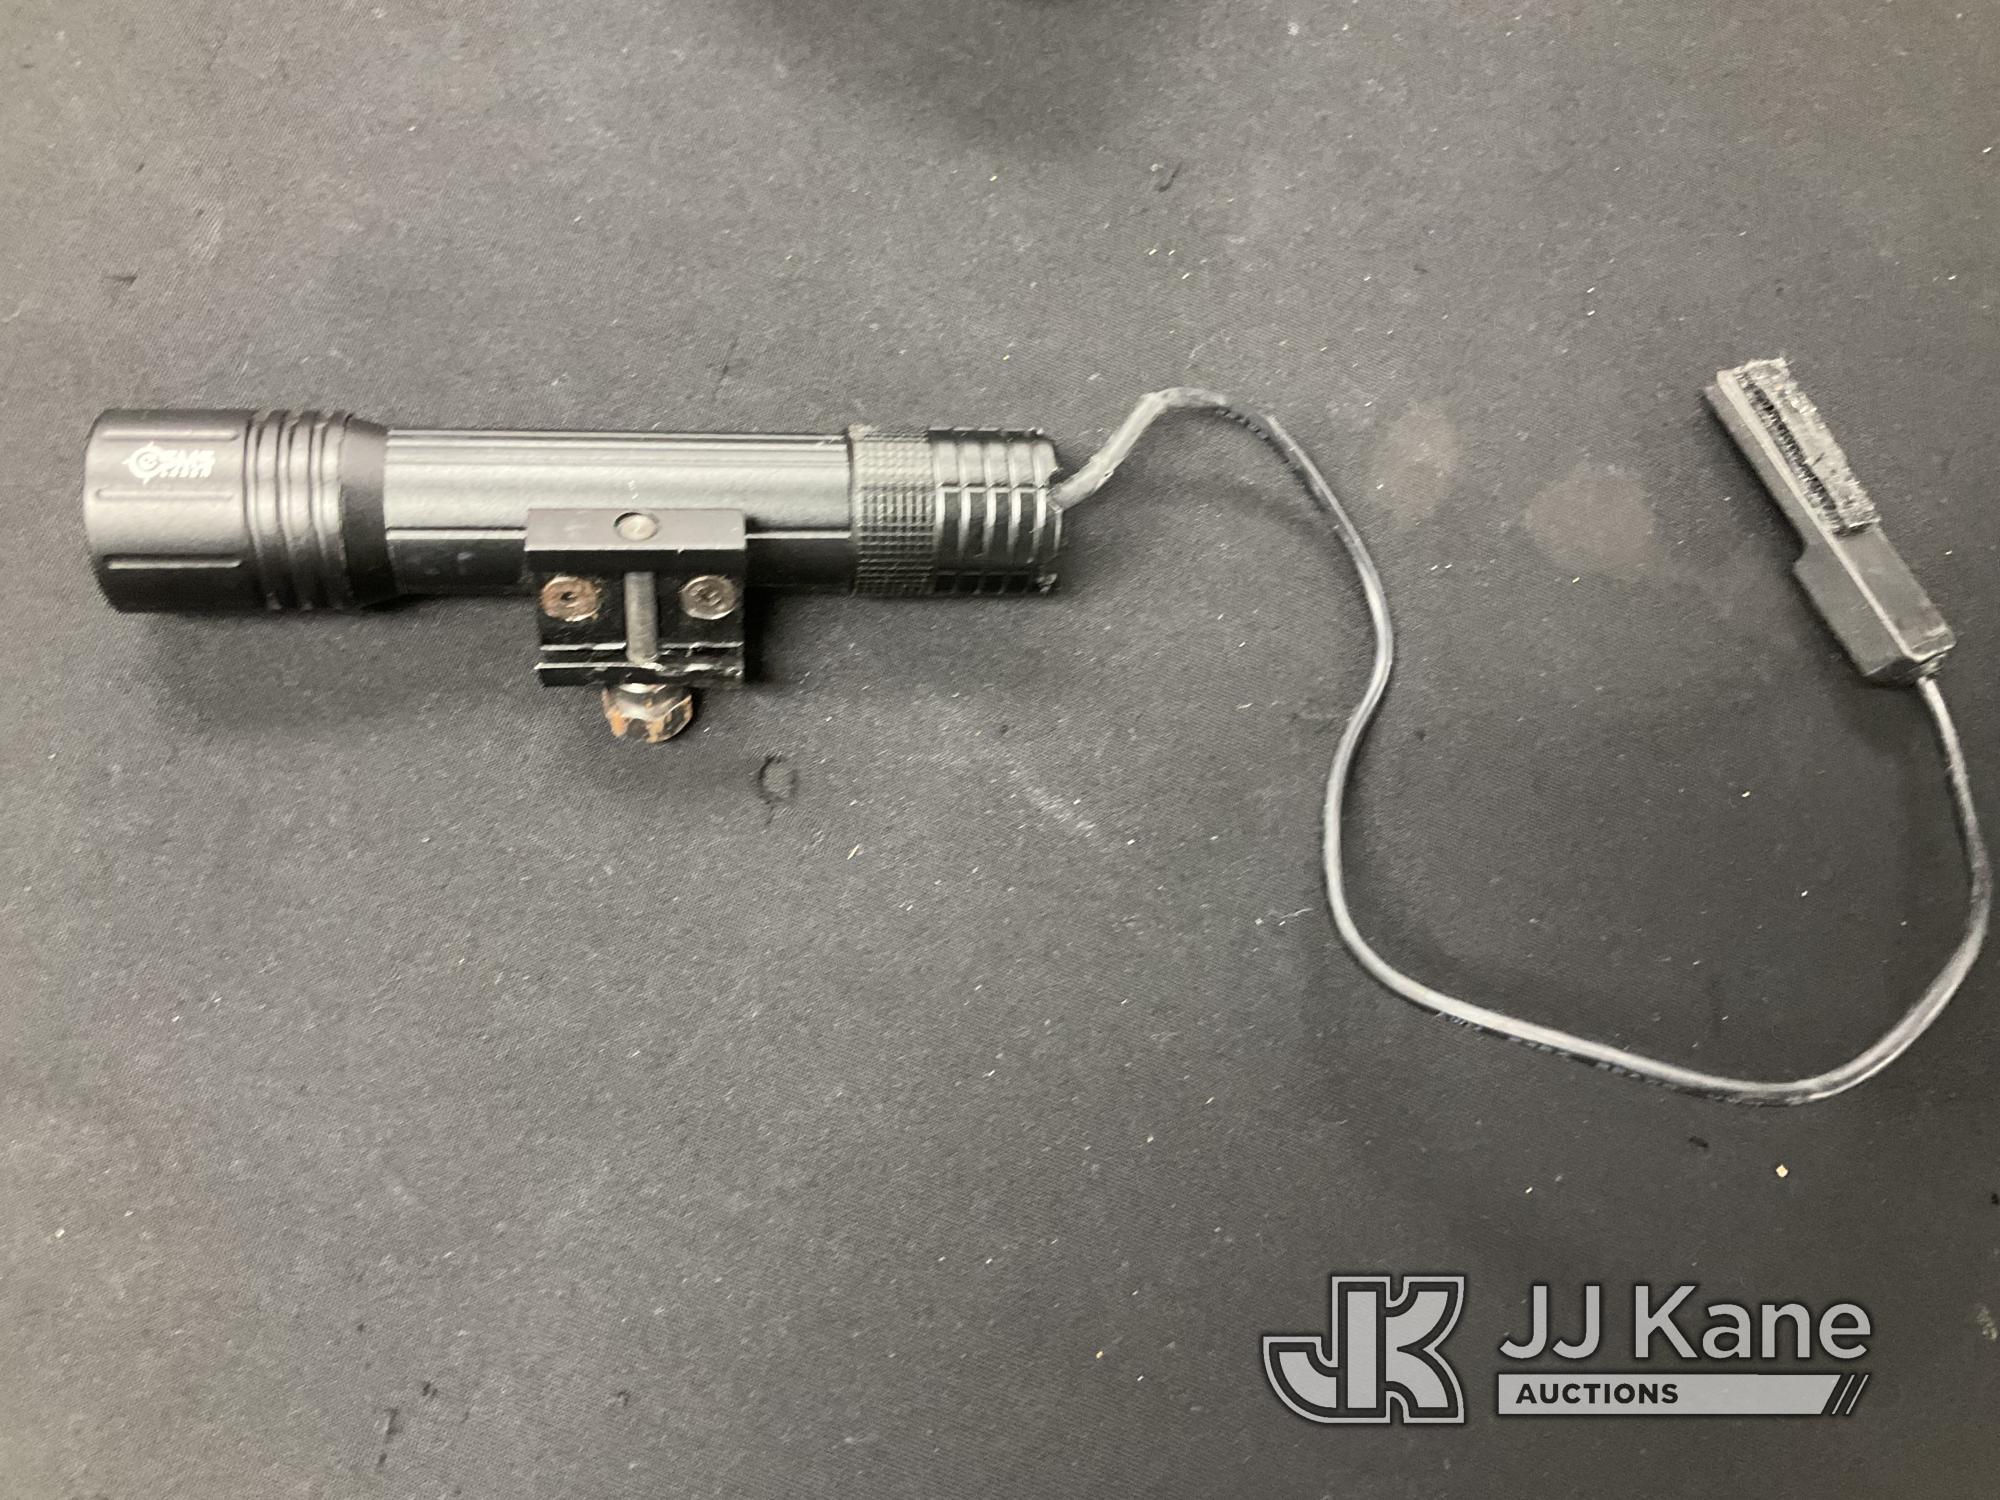 (Jurupa Valley, CA) Gun Attachments / Accessories (Used) NOTE: This unit is being sold AS IS/WHERE I